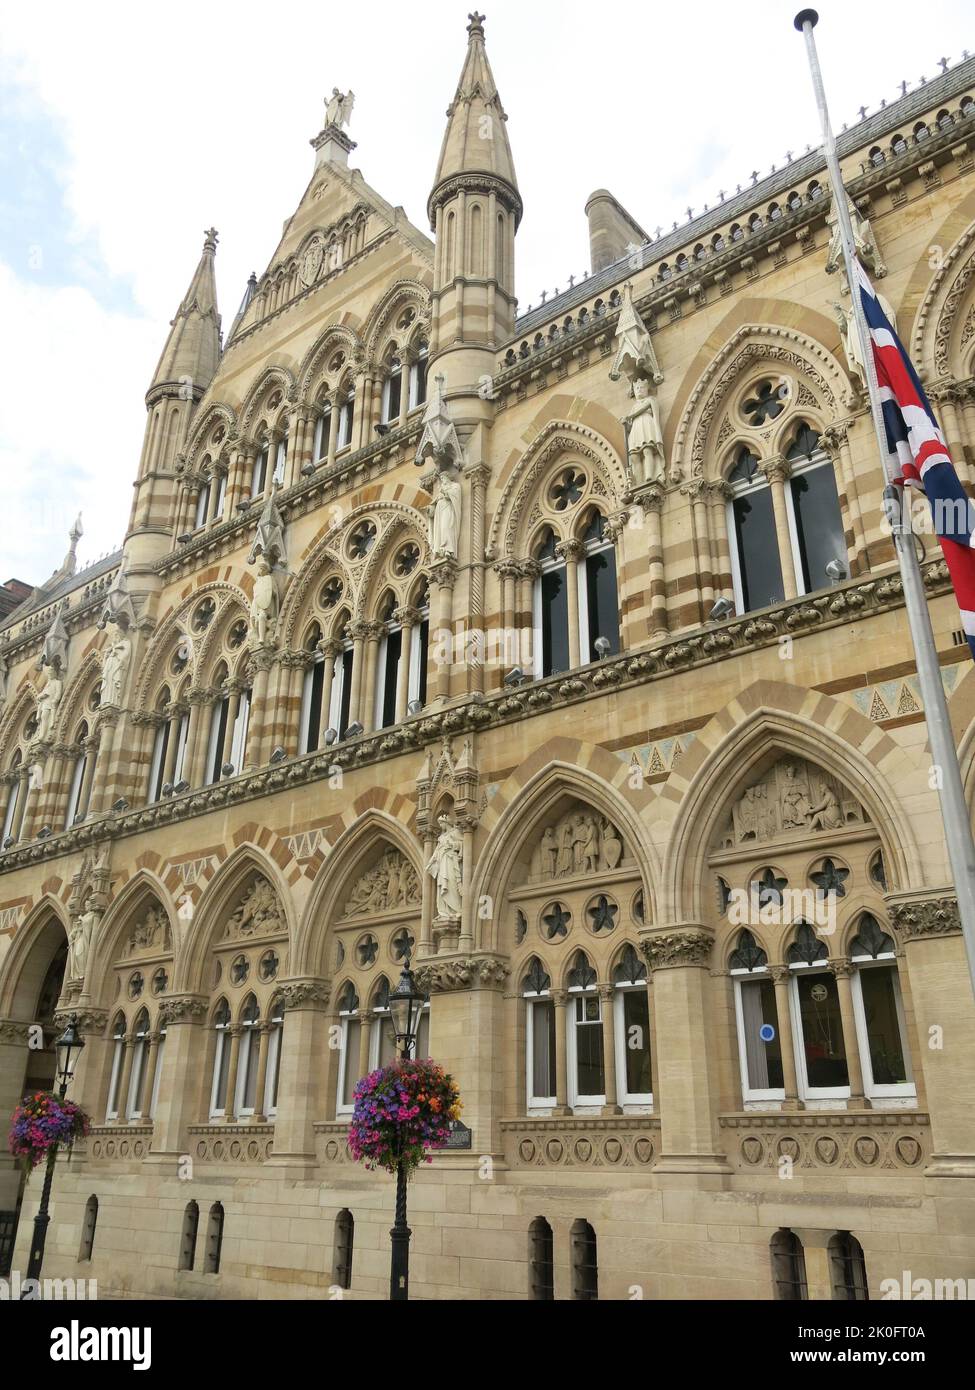 The Union Jack flag is flying at half-mast at the Guildhall in Northampton, the ornate civic building for the Town Council. Stock Photo